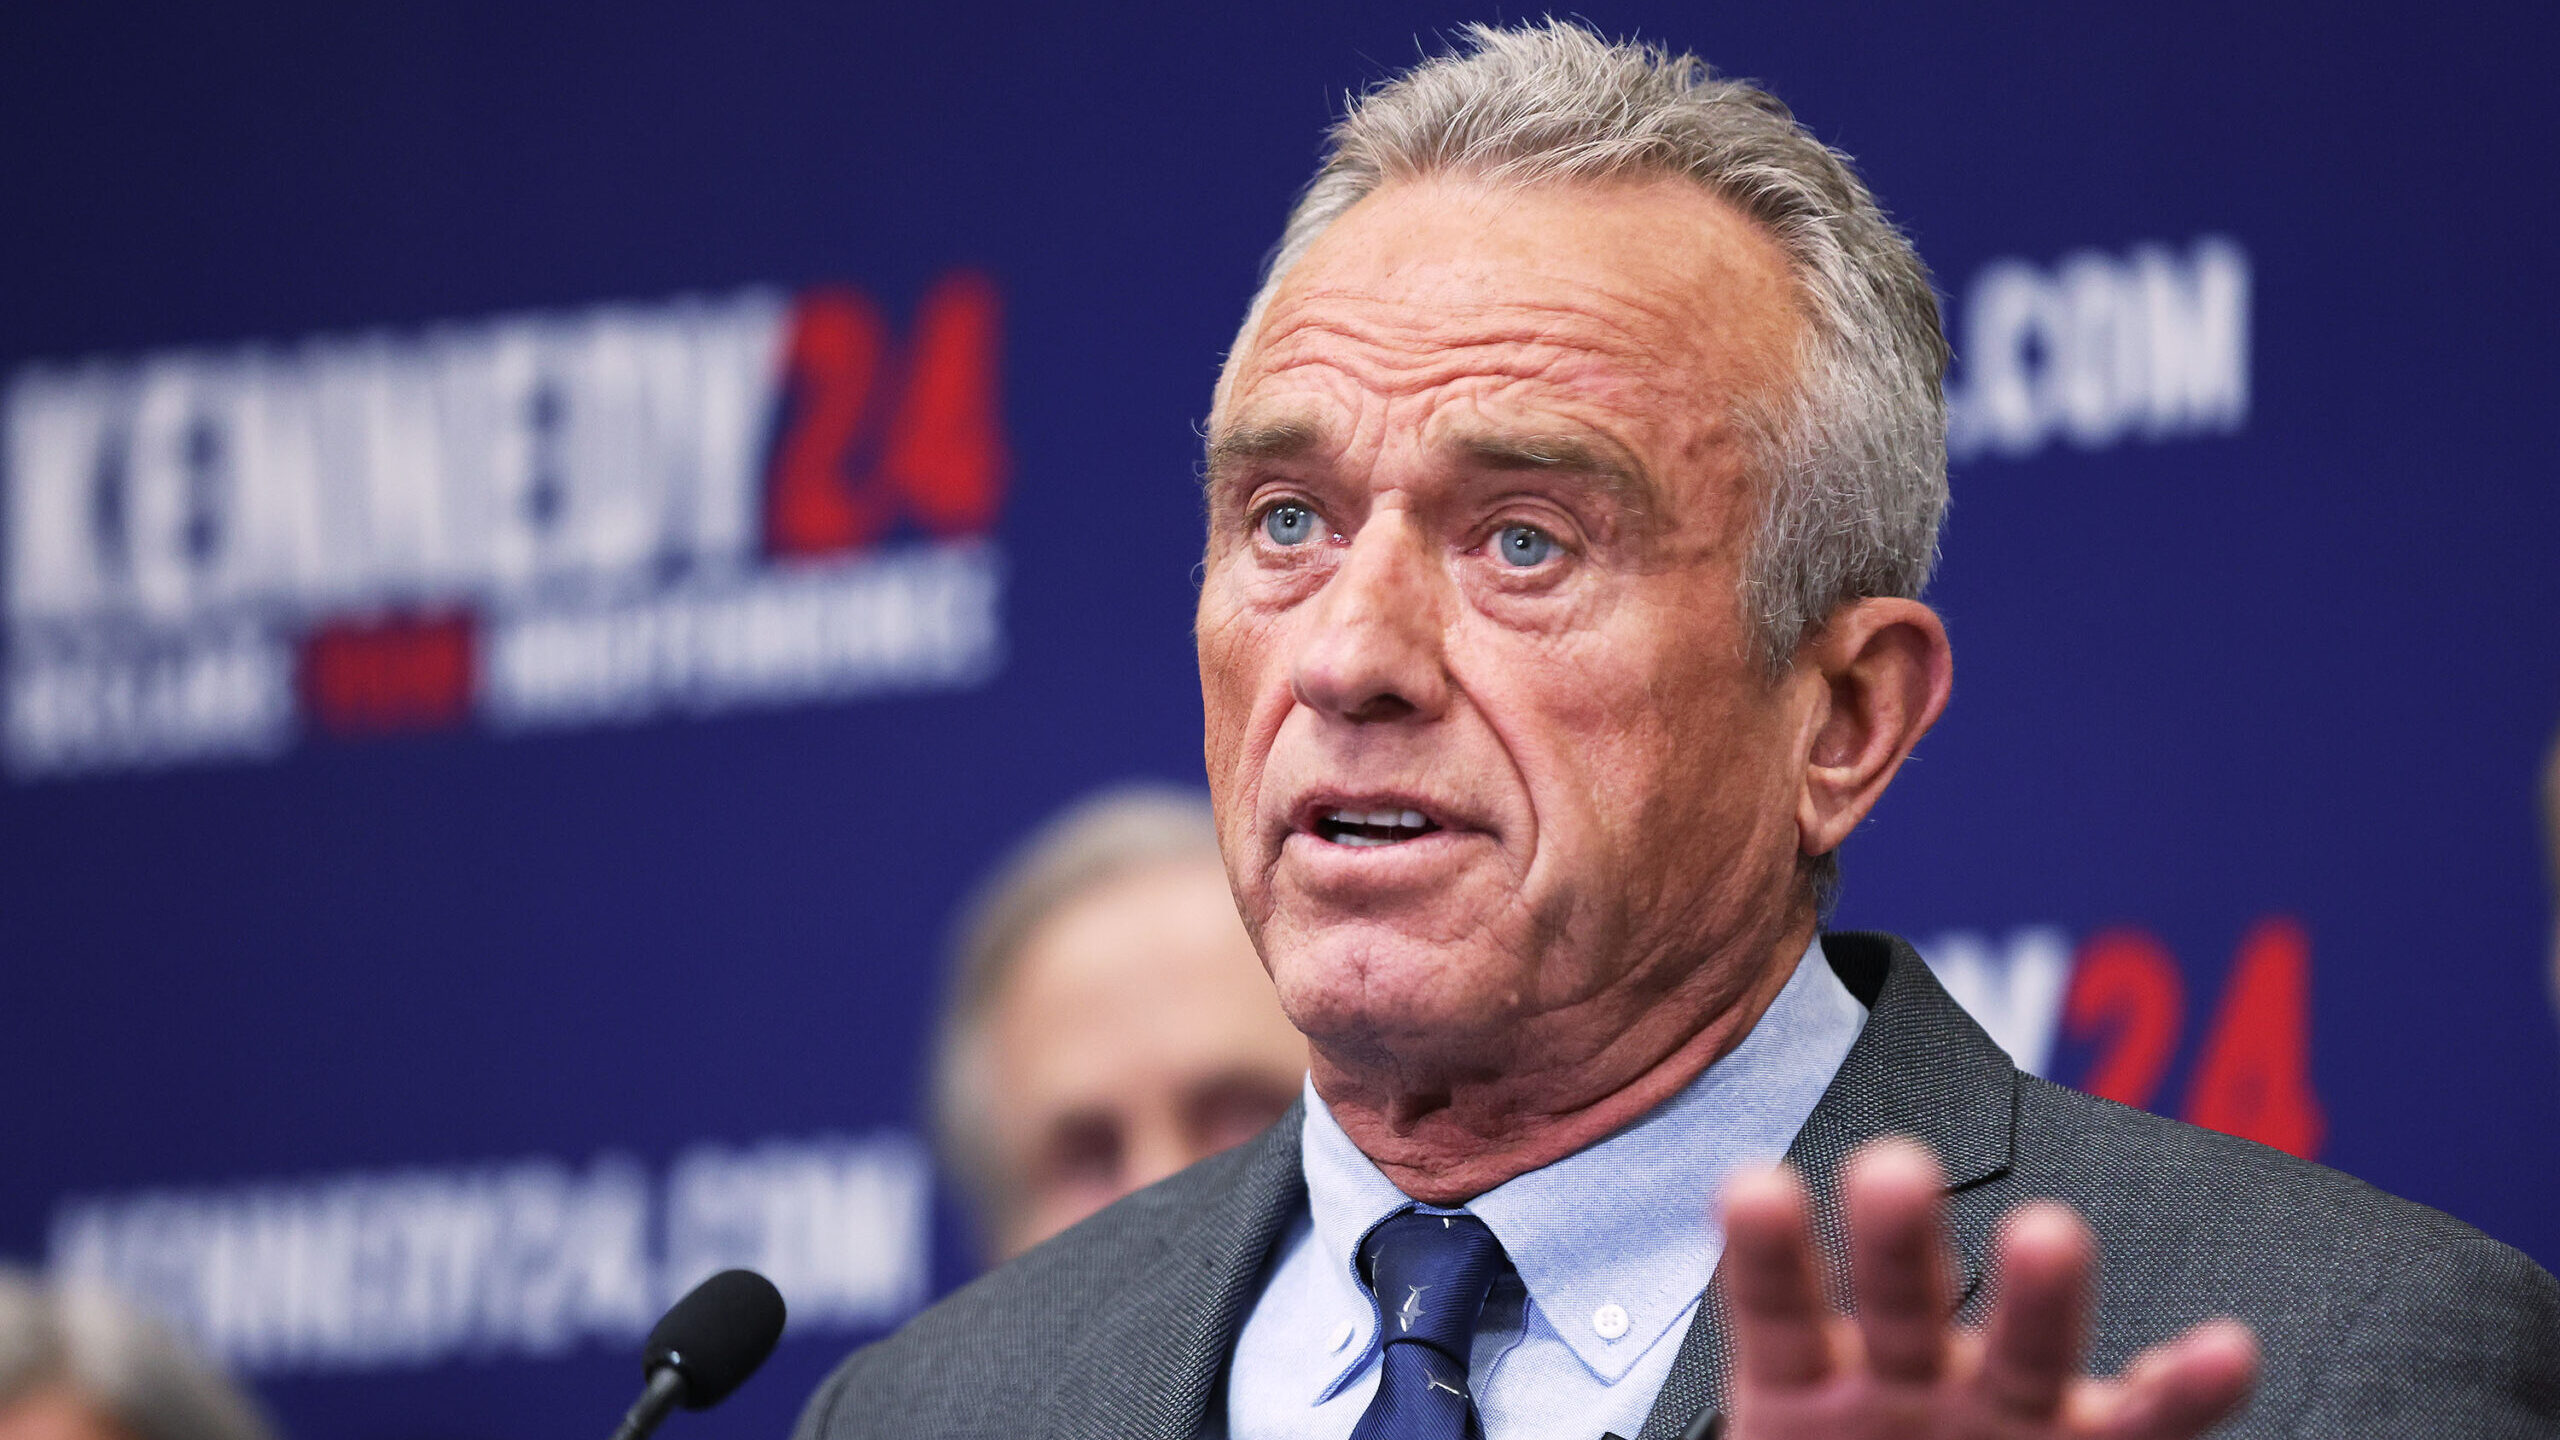 Independent presidential candidate Robert F. Kennedy Jr. speaks during a press conference at the Ea...